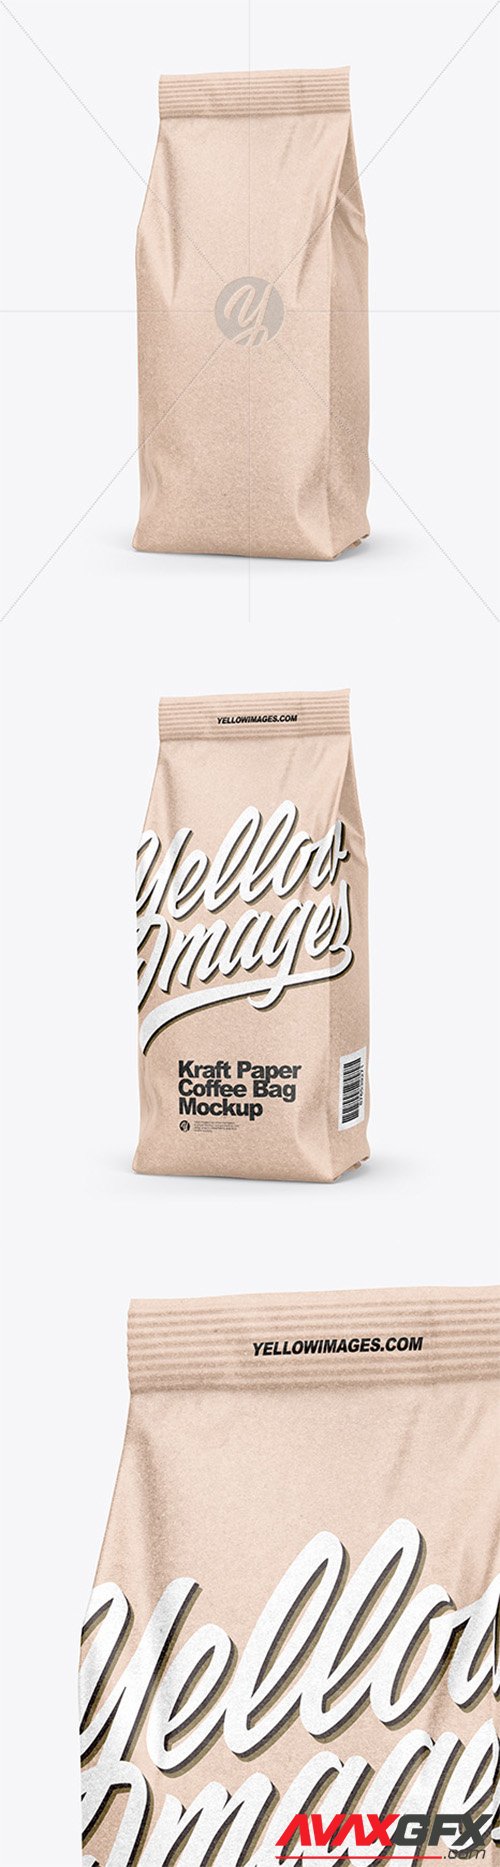 Download Kraft Coffee Bag Mockup Half Side View 61909 Avaxgfx All Downloads That You Need In One Place Graphic From Nitroflare Rapidgator